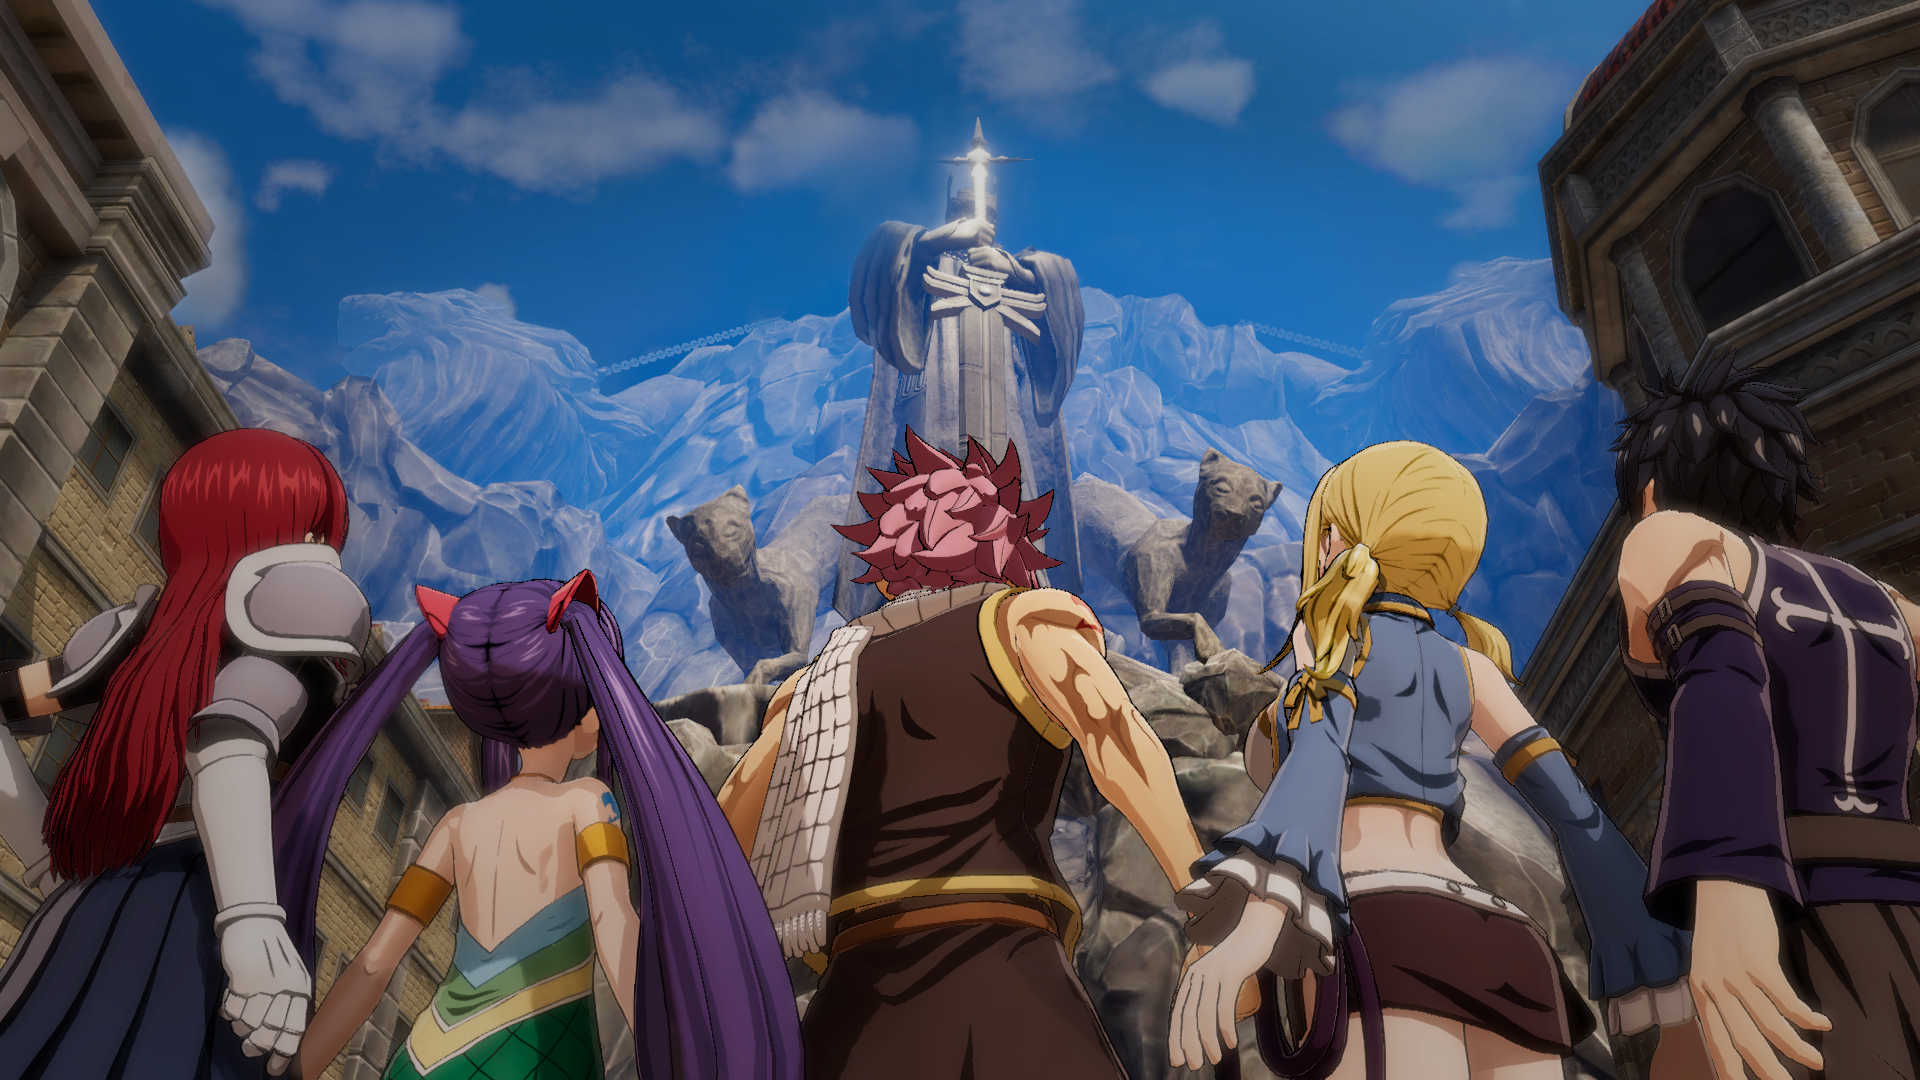 News] Fairy Tail Hero's Journey Browser Game gets Screenshot! : r/fairytail